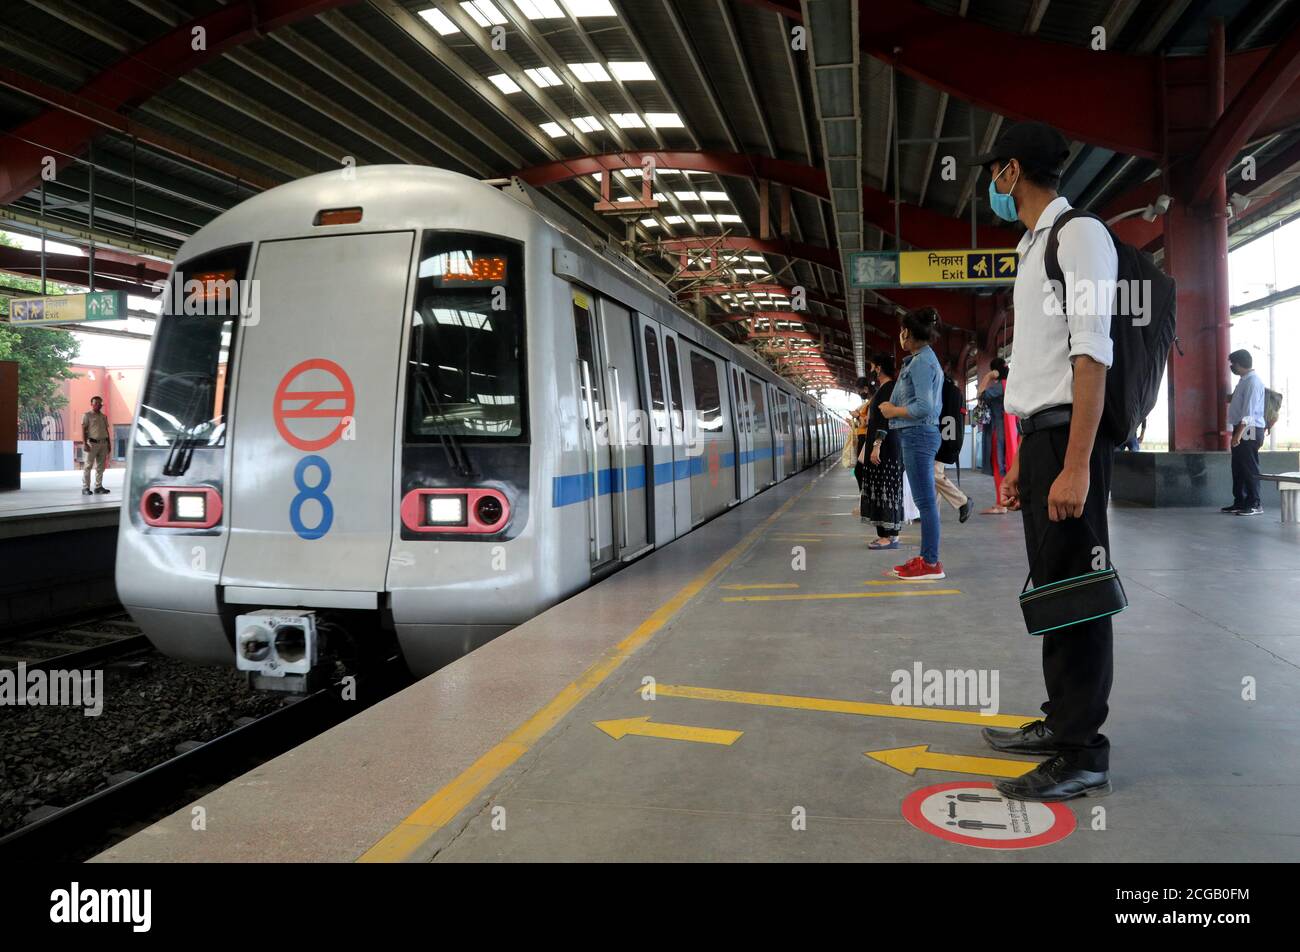 Passenger wait for the metro on Blue line between Dwarka Sec -21 to Electronic City/Vaishali as Delhi Metro Rail corporation (DMRC) resume operations after 171 days of lockdown due to Covid-19.The Blue line form Dwarka Sec -21 to Electronic City/Vaishali (65.35 km/58 stations) and Pink Line, from Majlis Park to Shiv Vihar(57.58 km & 38 stations) will run from 7 to 11 AM and 4 to 8 PM. The metro will resume full services from September 12. India is the world's second highest country with 4,370,128 confirmed cases of coronavirus and 73, 890 deaths. Stock Photo